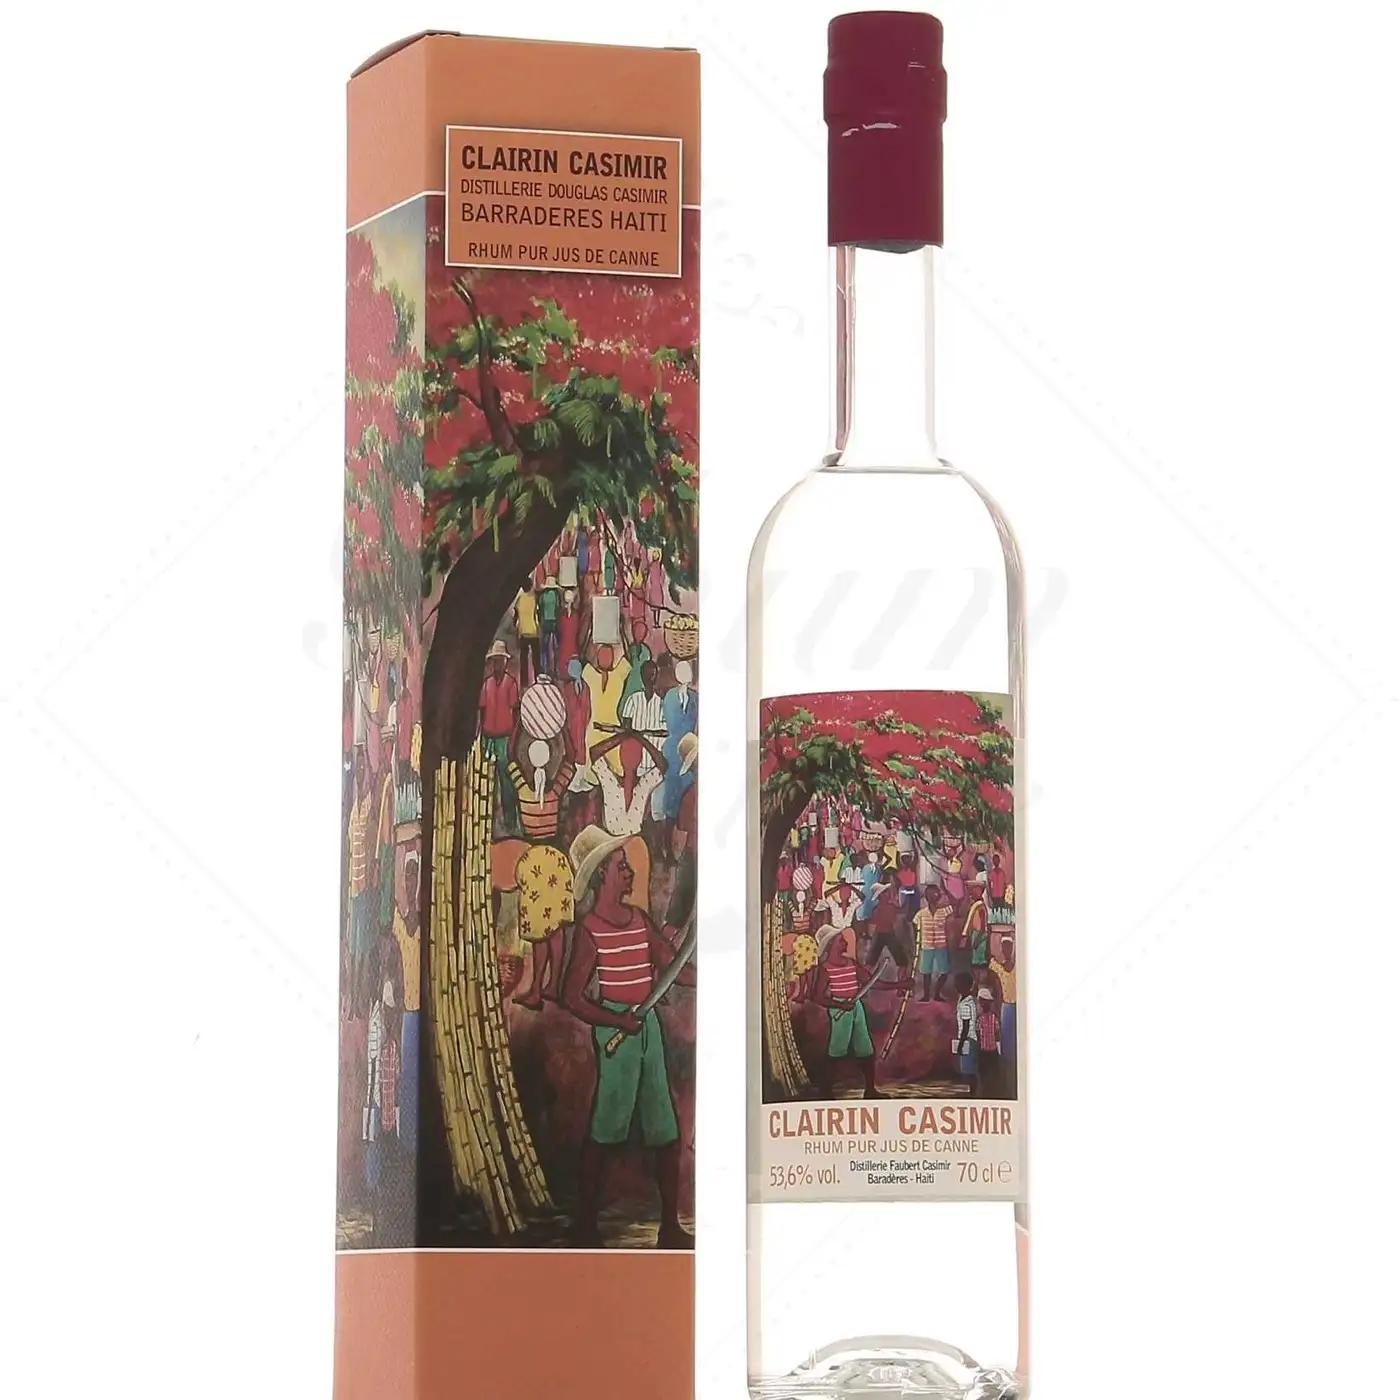 Image of the front of the bottle of the rum Clairin